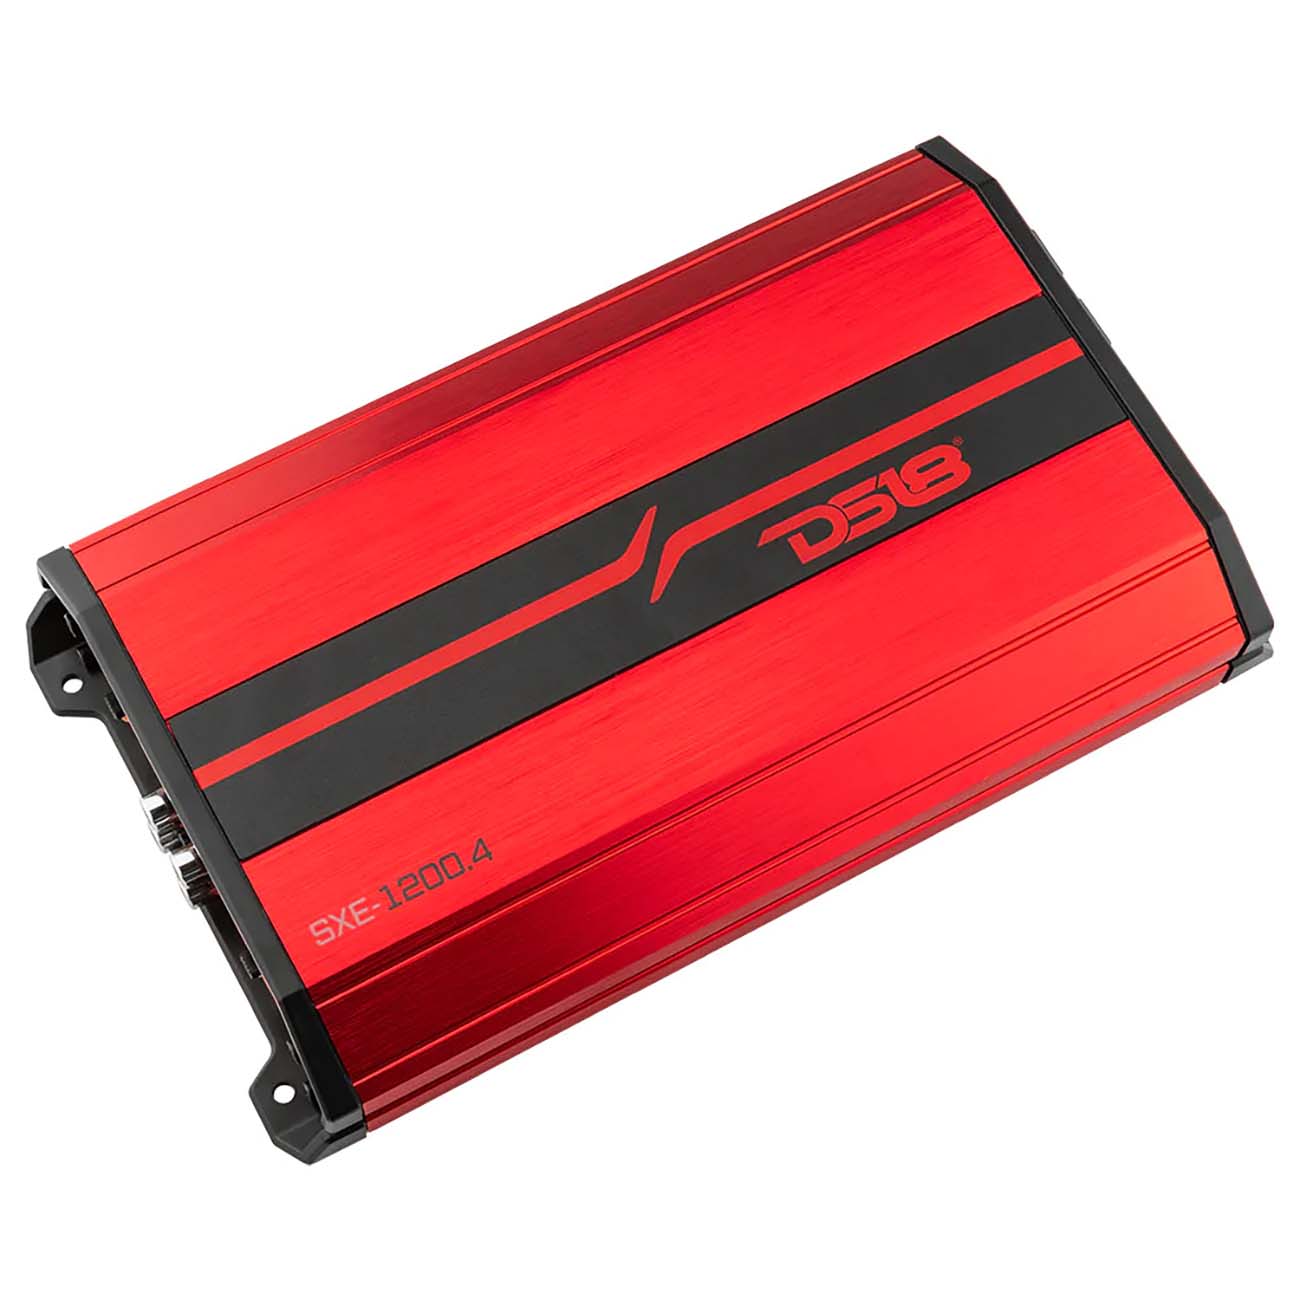 DS18 4 Channel Amplifier, 400W RMS/1200W MAX – Red